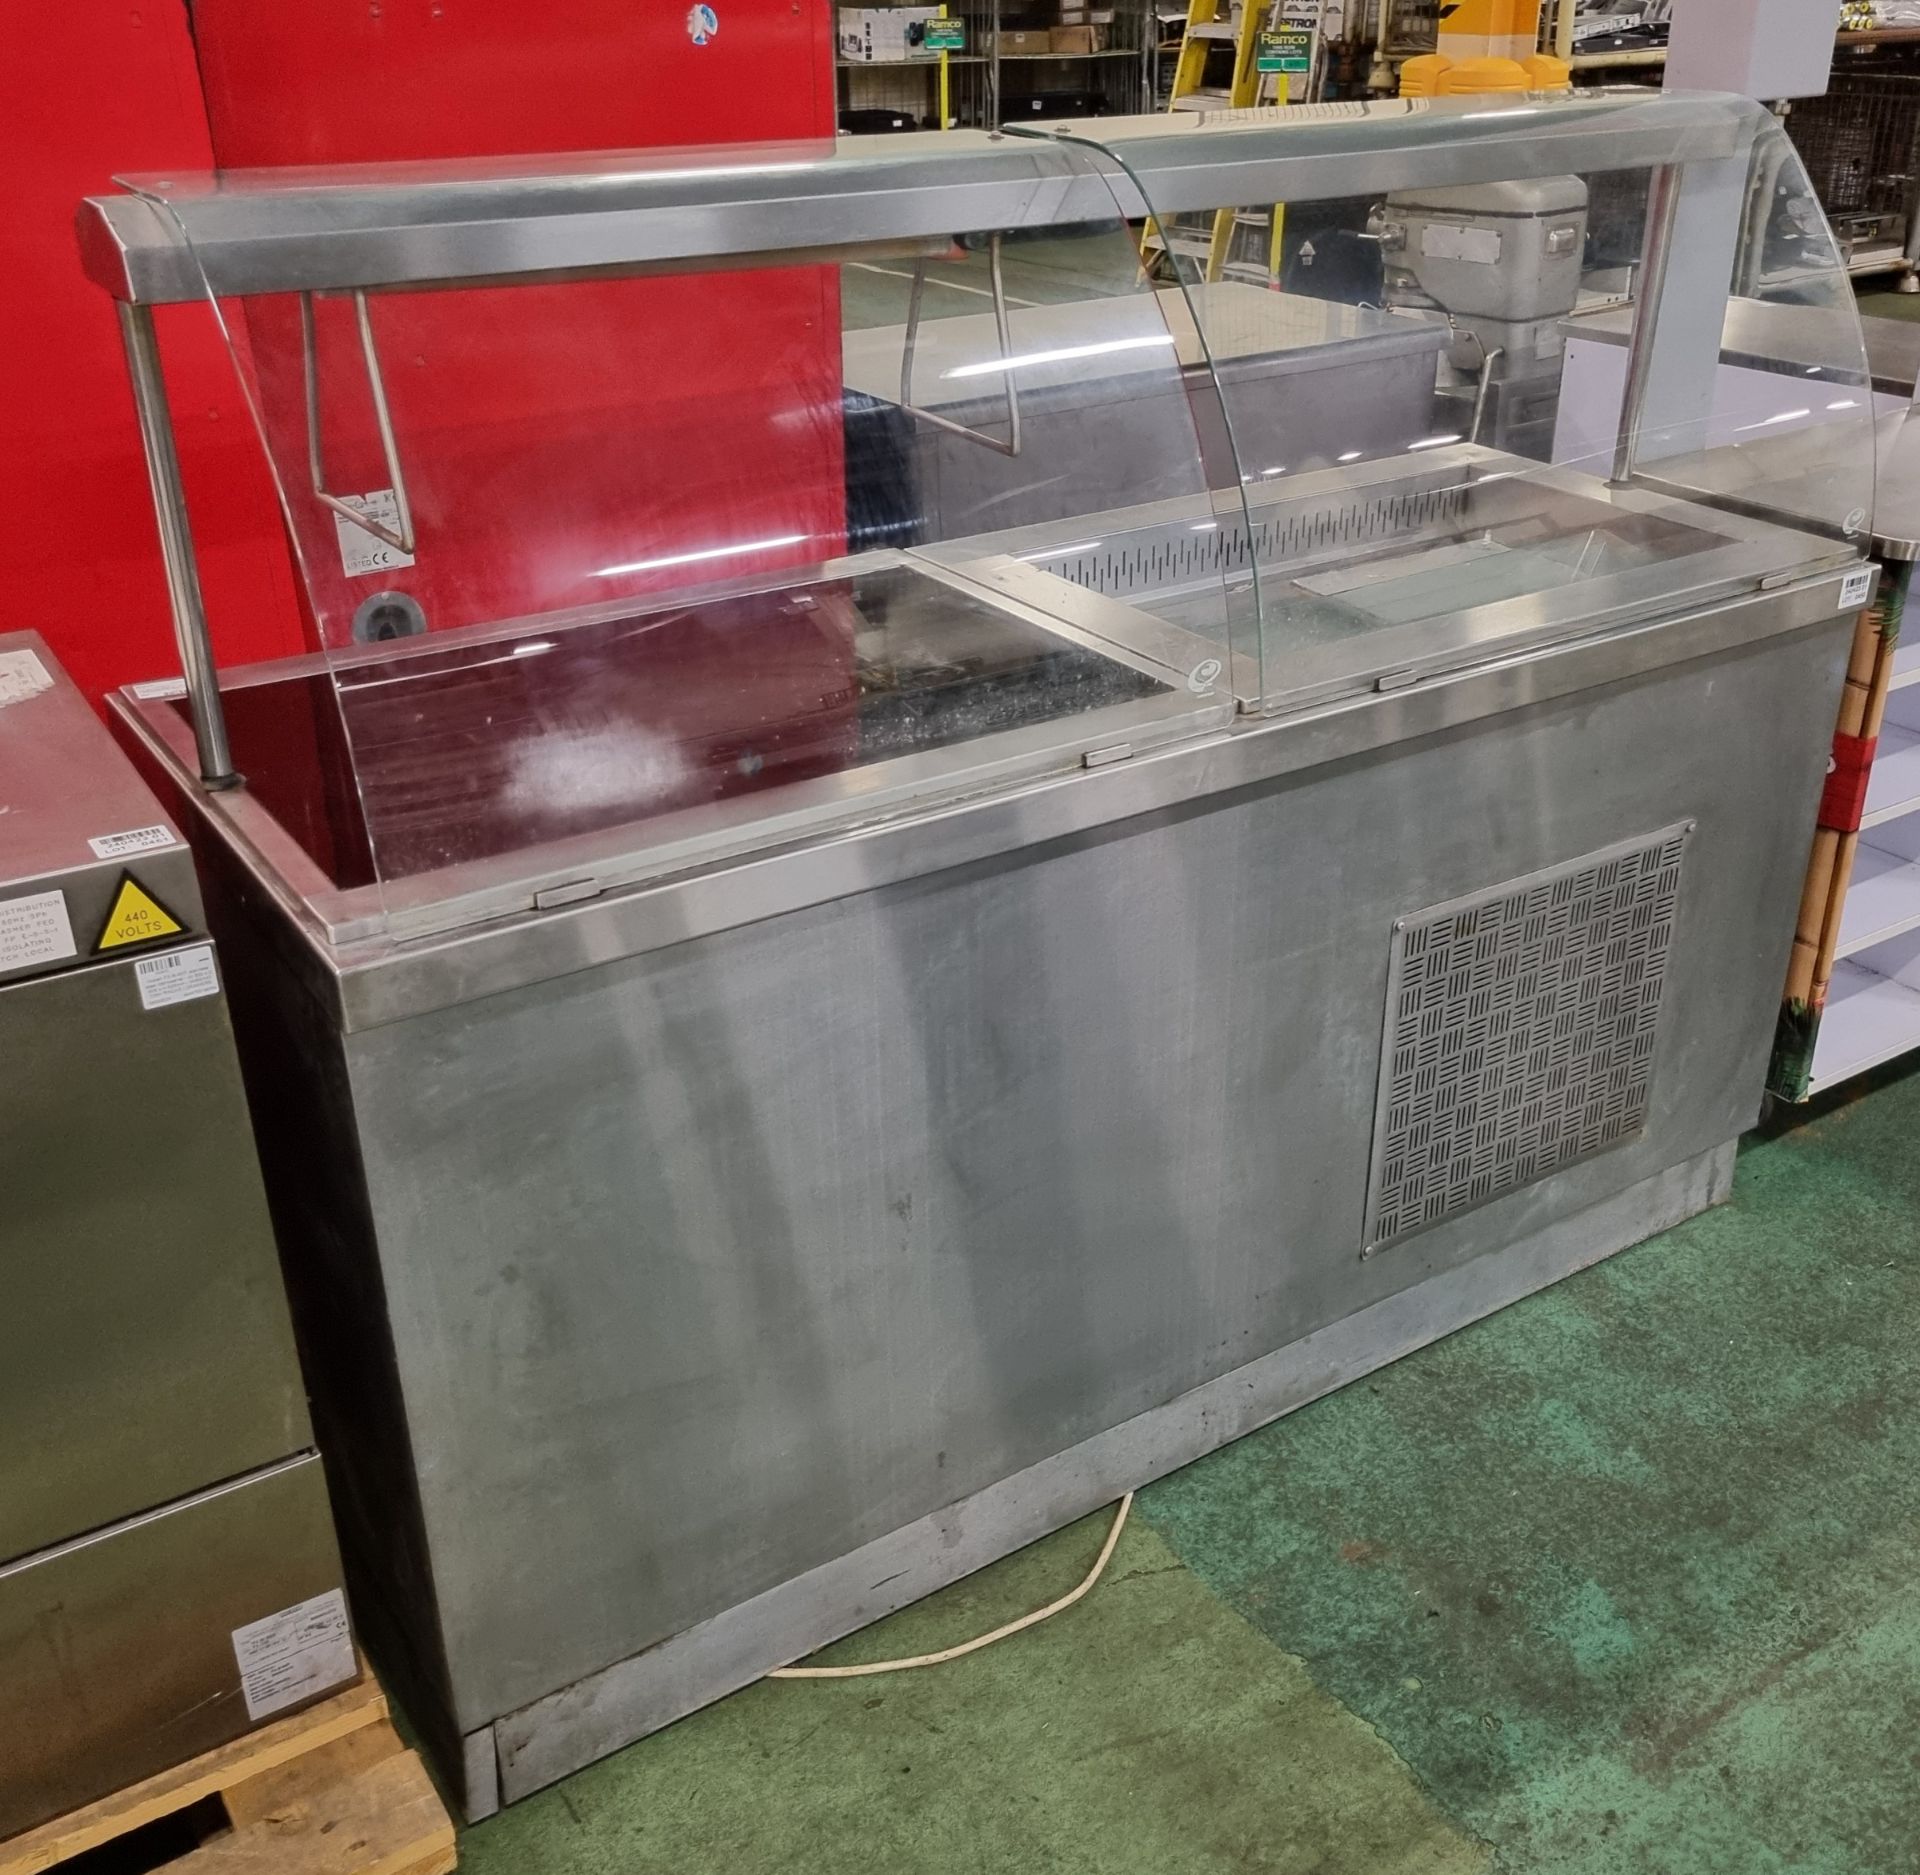 Stainless steel unit with bain marie & hot plate section - W 1800 x D 700 x H 1370mm - Image 3 of 6